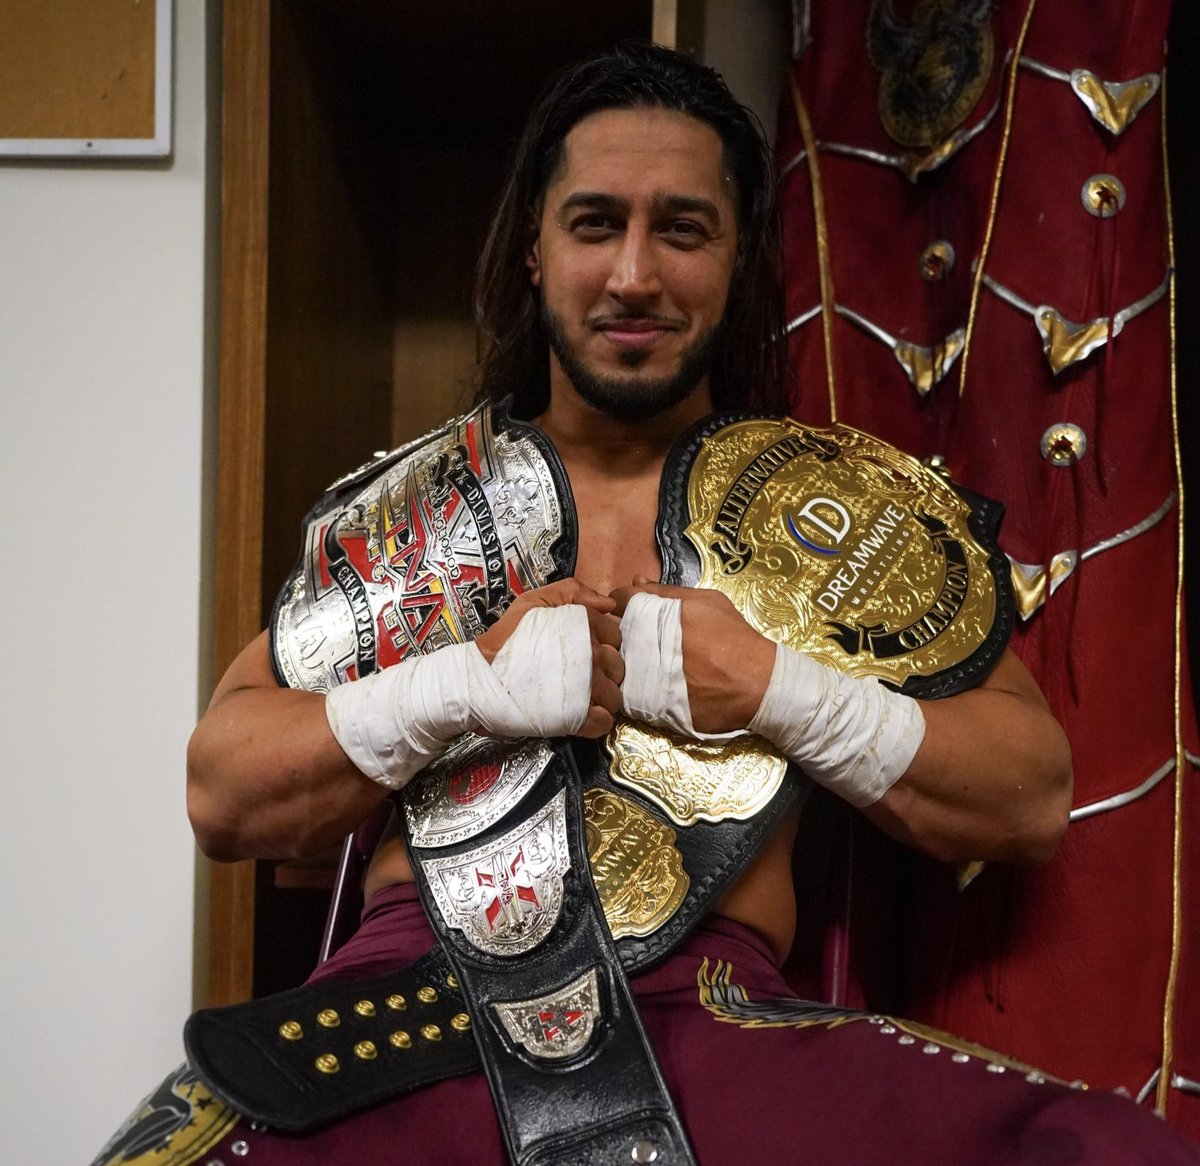 Proud Moment Allhamdulilah 😍

Mustafa Ali is the first wrestler to win the X-Division title on his TNA debut.

The first Muslim & Pakistani wrestler to main event a TNA PPV.

@MustafaAli_X

#MustafaAli2024
#InAliWeTrust